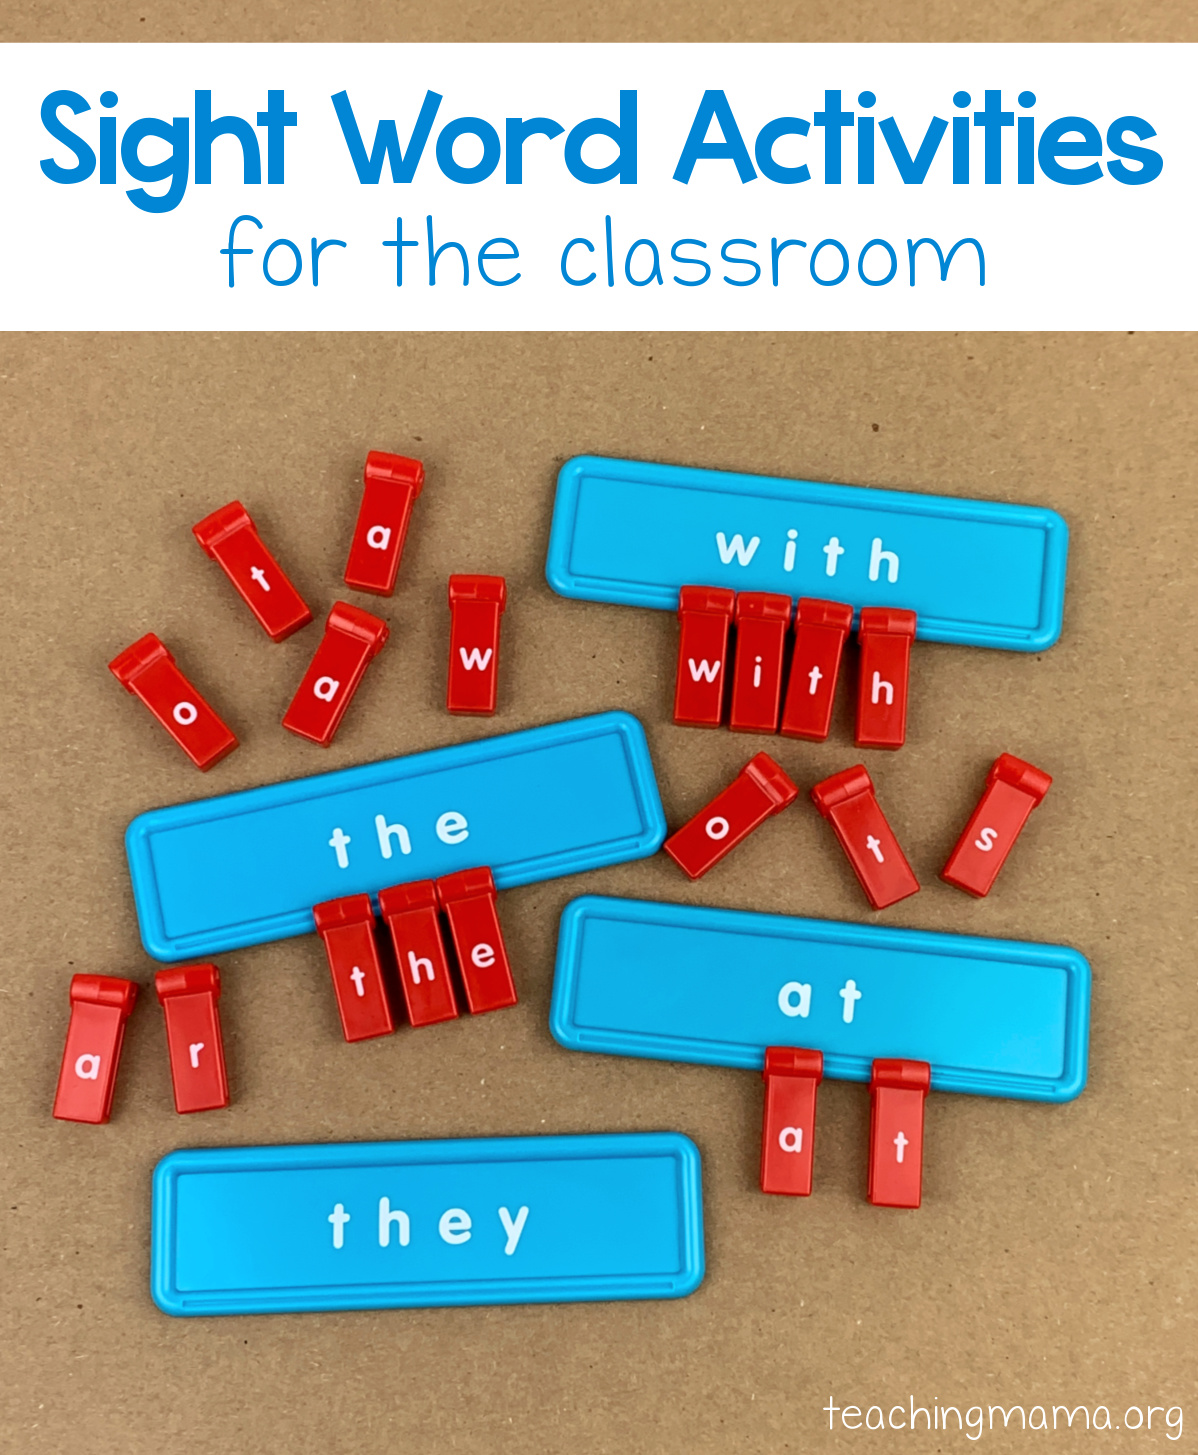 3 Sight Word Activities for the Classroom - Teaching Mama